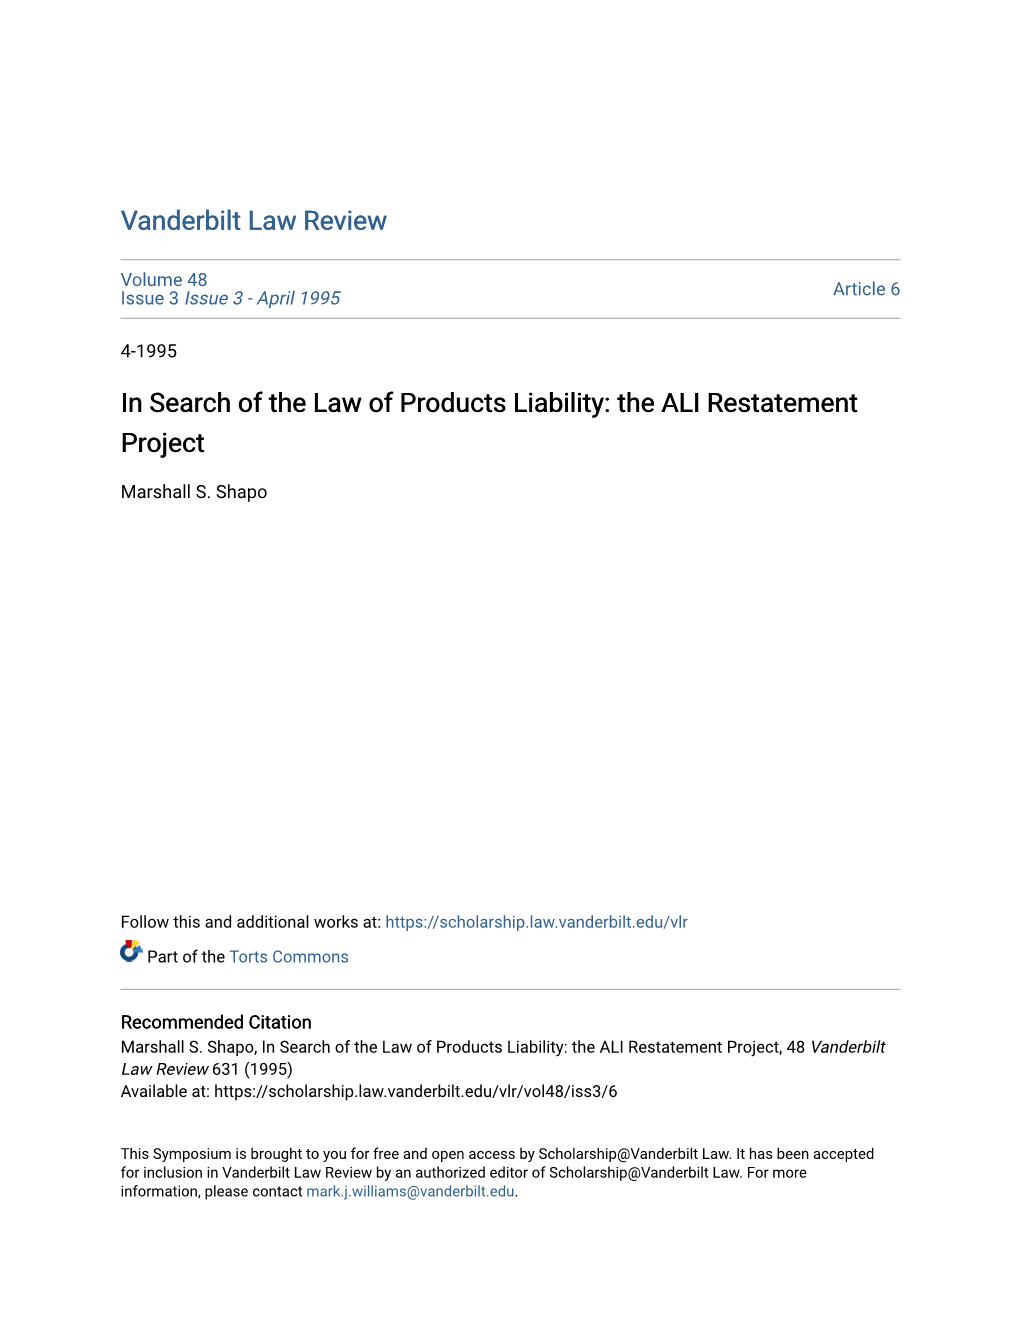 In Search of the Law of Products Liability: the ALI Restatement Project